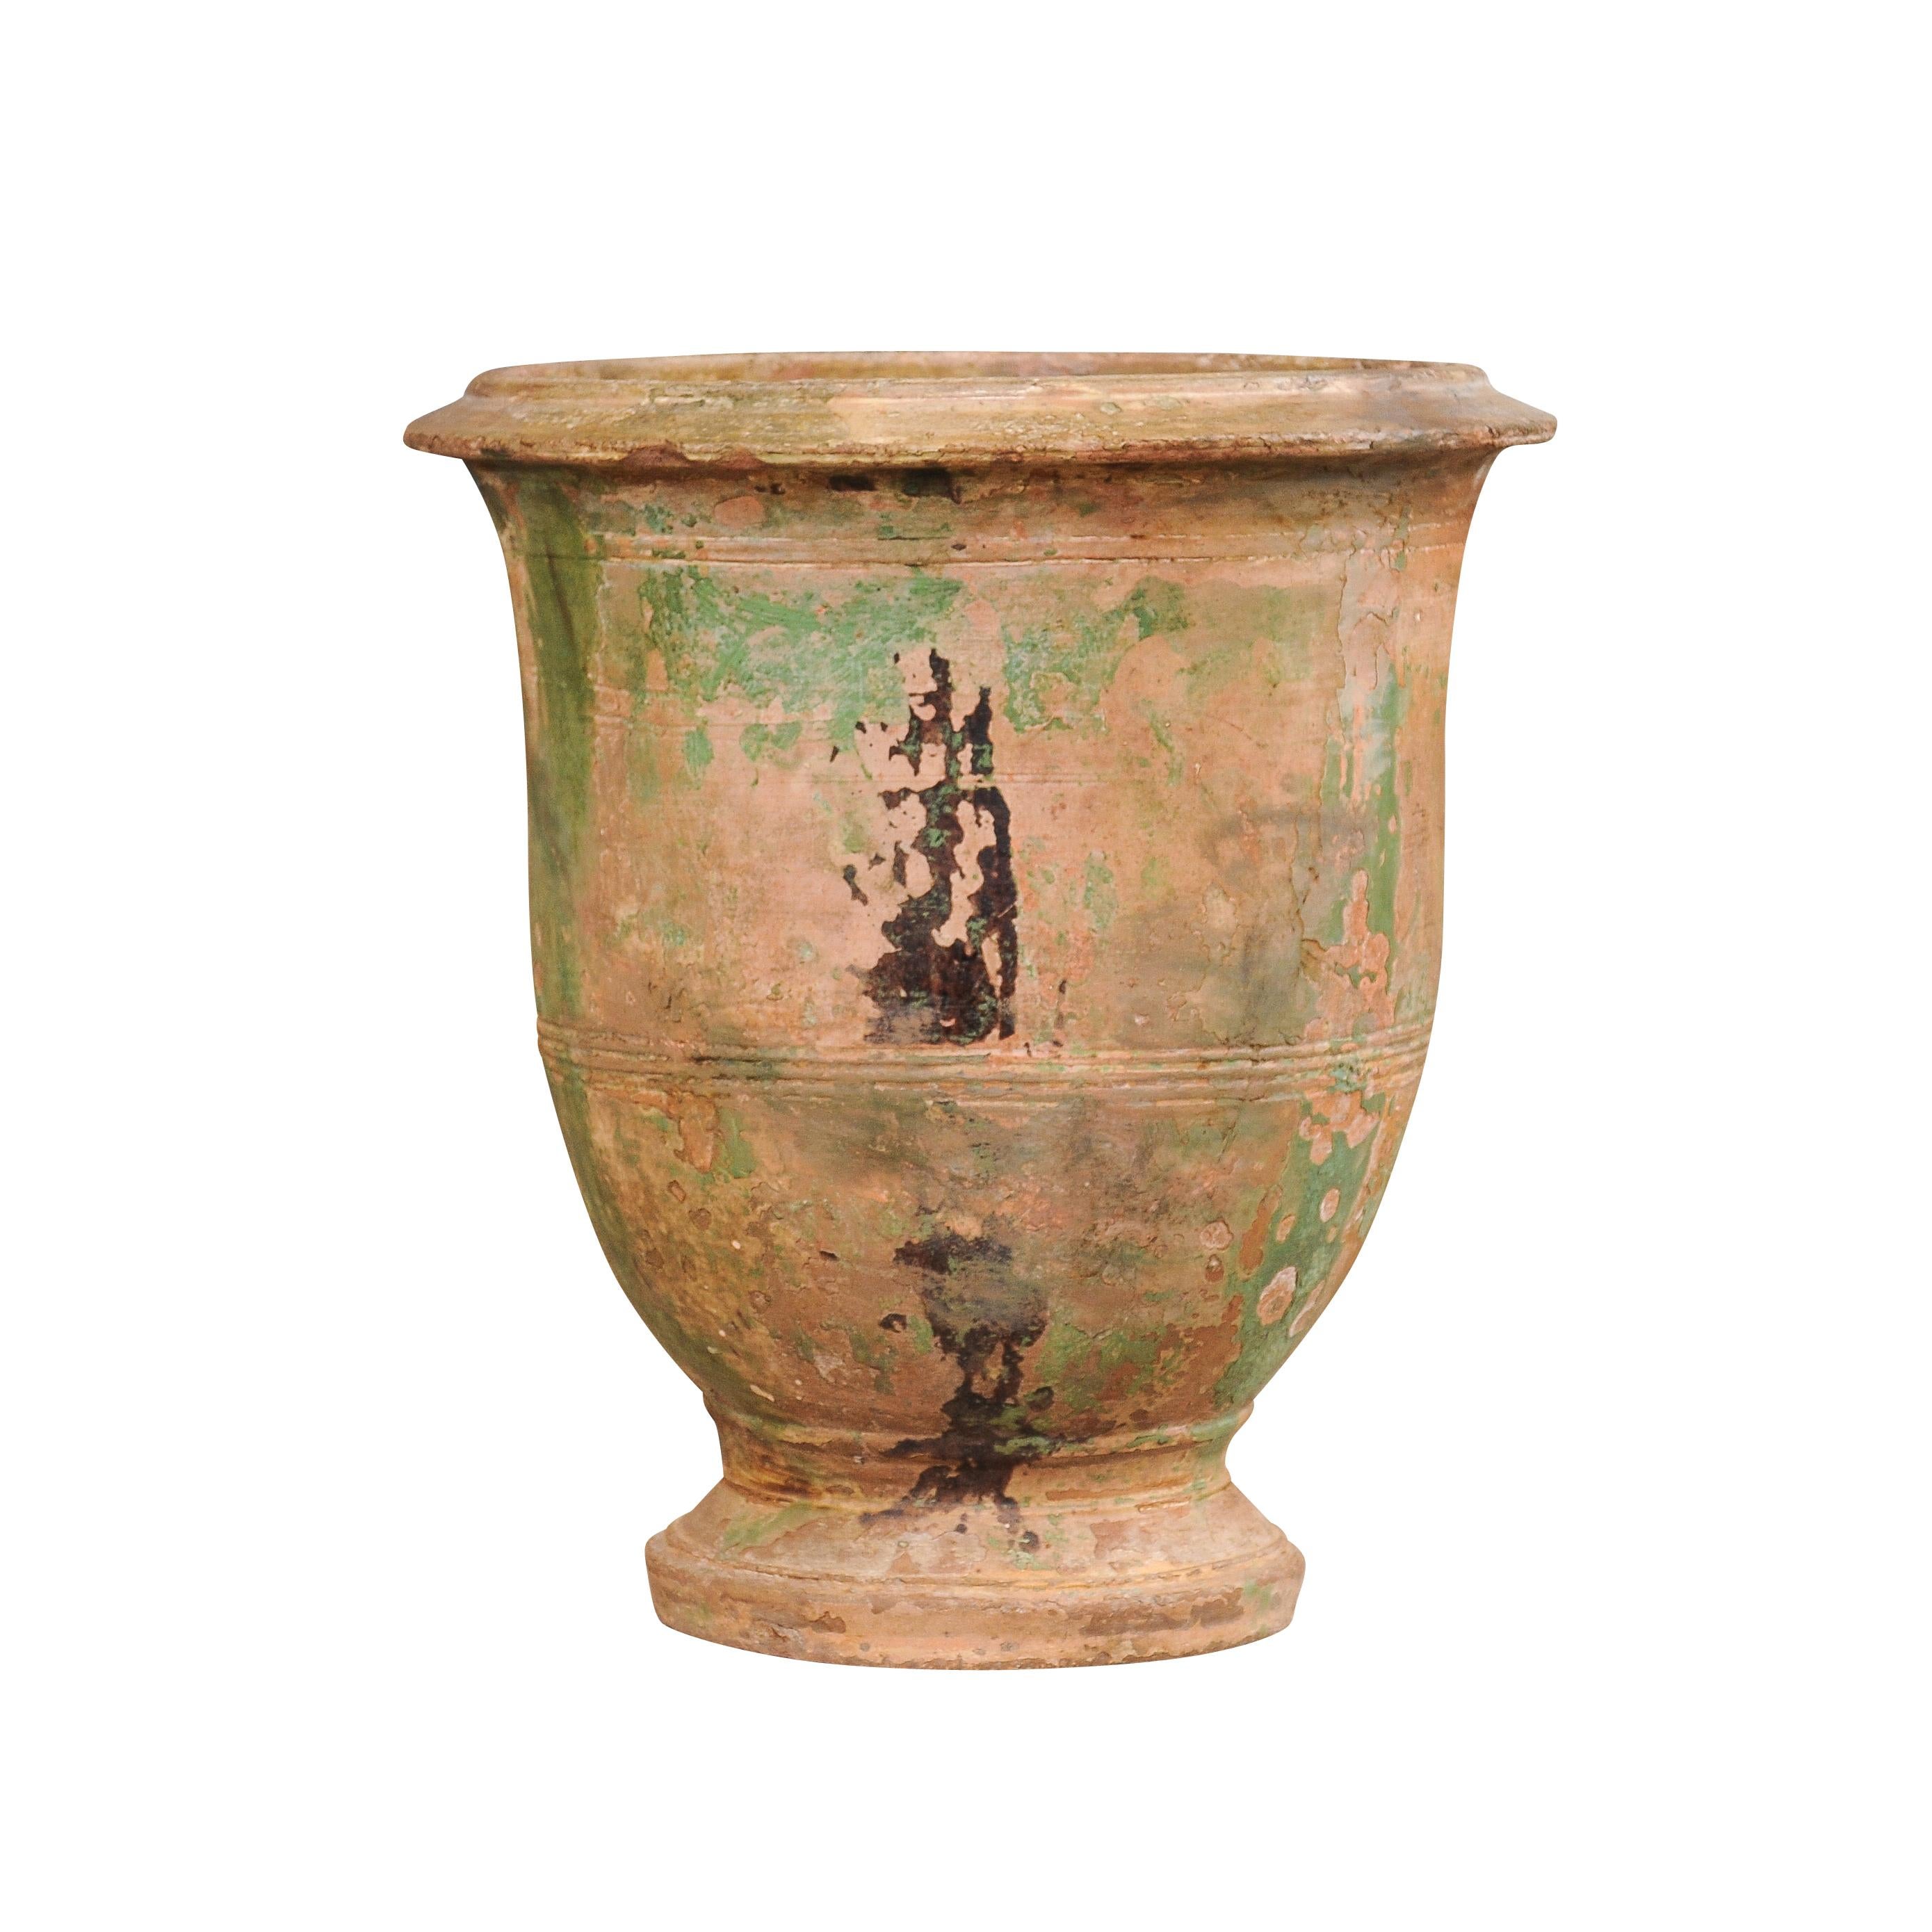 A French Provincial Anduze vase from the early 19th century with traces of green and brown glaze and nice rustic character. Steeped in rich history and displaying a rustic allure, this French Provincial Anduze vase from the early 19th century is an